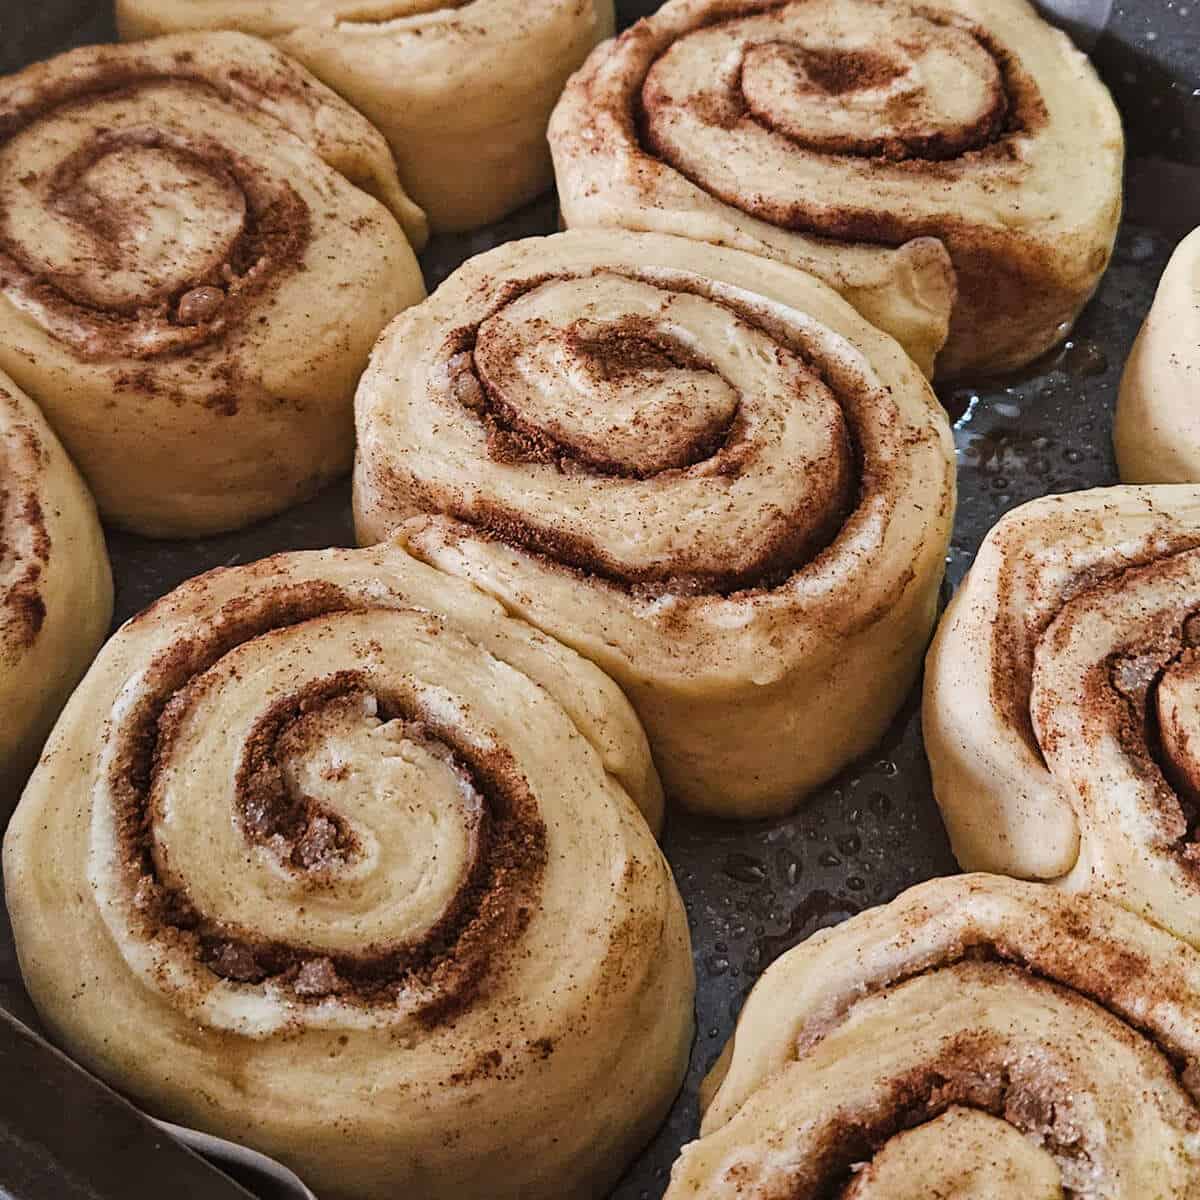 cinnamon rolls uncooked in paper lined, greased baking pan, ready to put in oven.